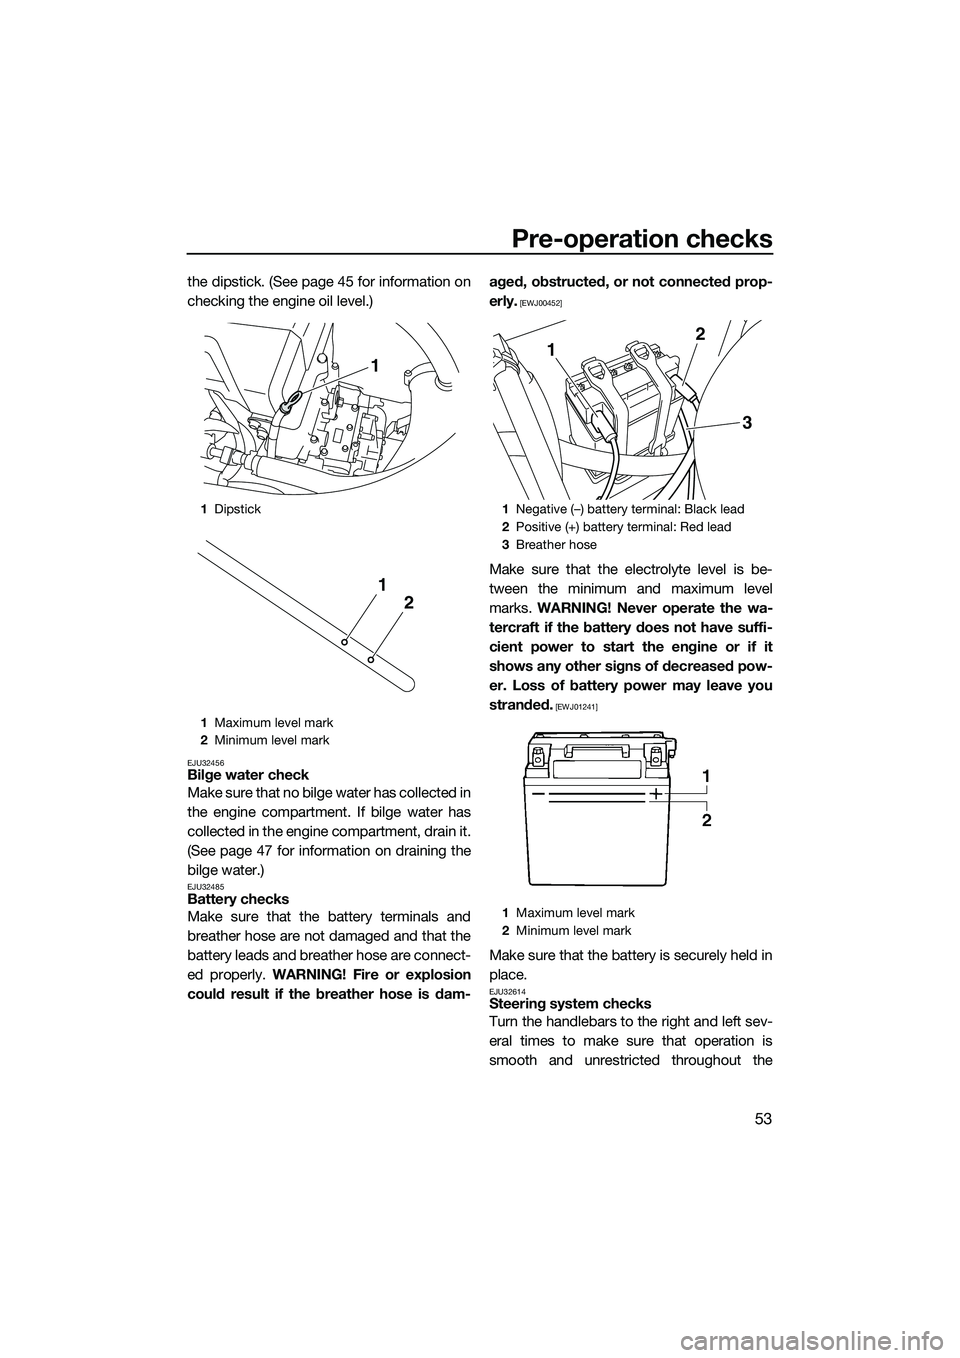 YAMAHA VXS 2014  Owners Manual Pre-operation checks
53
the dipstick. (See page 45 for information on
checking the engine oil level.)
EJU32456Bilge water check
Make sure that no bilge water has collected in
the engine compartment. I